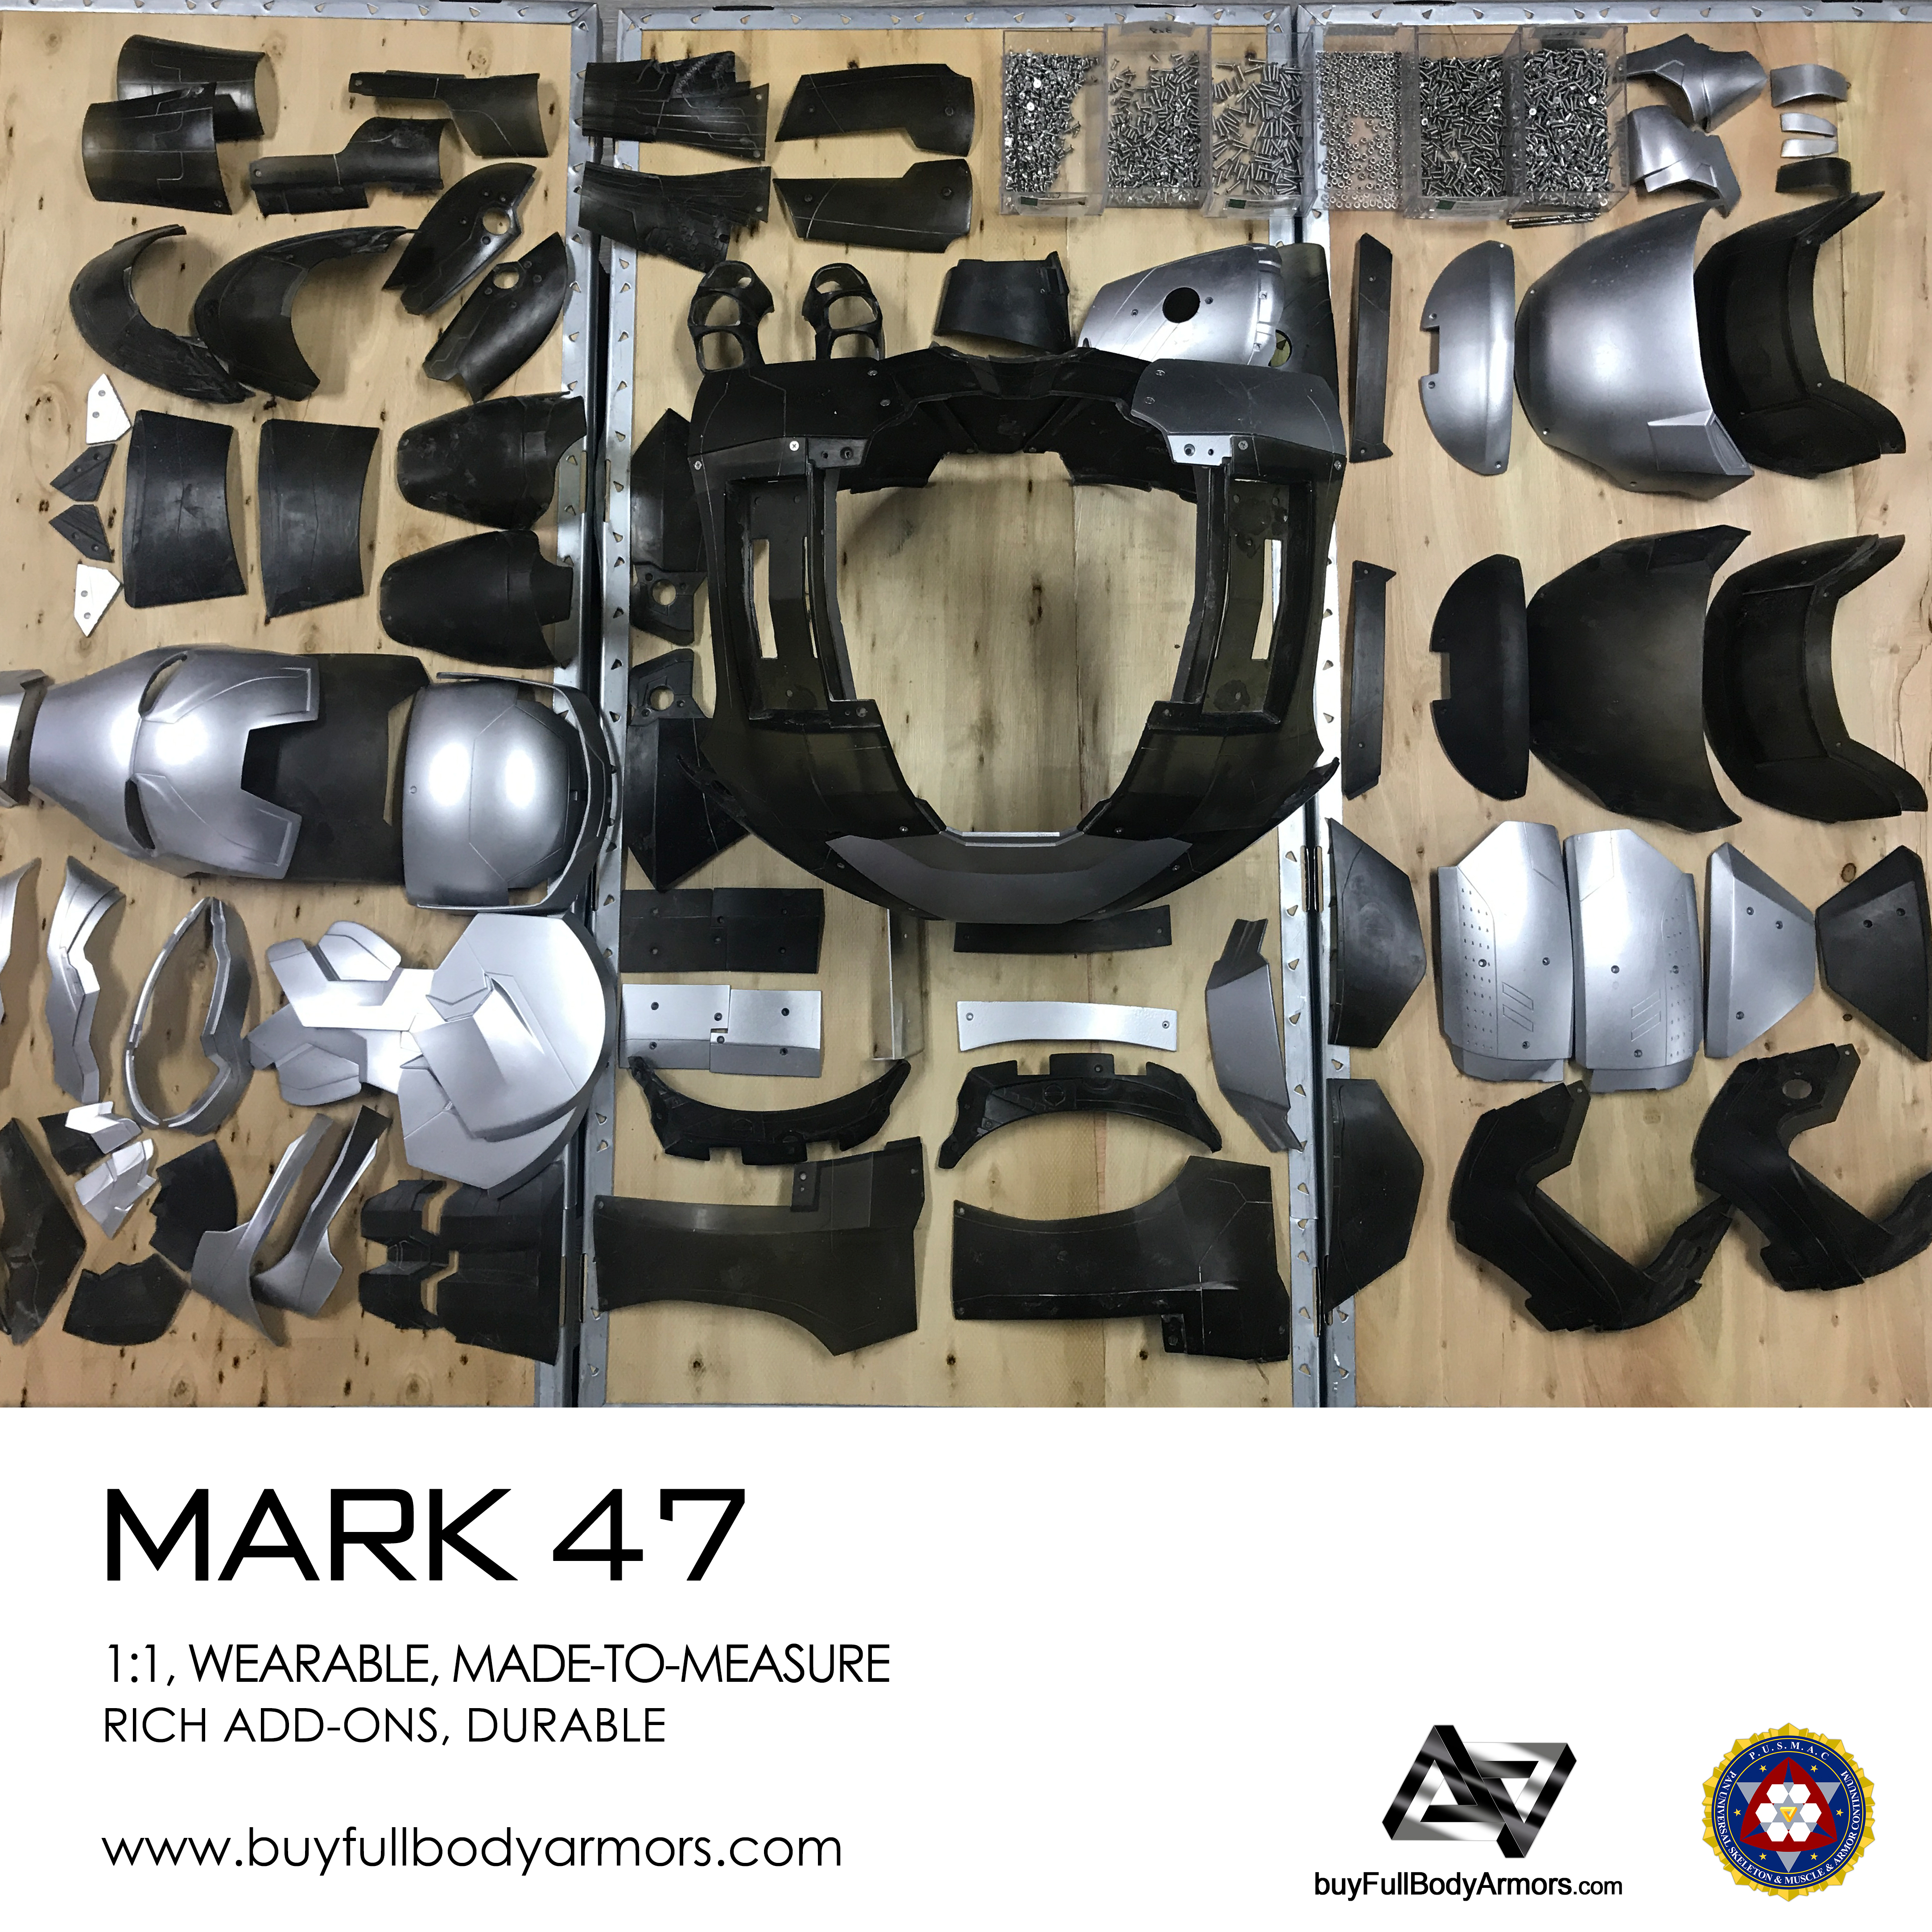 Mark 47 armor costume production update